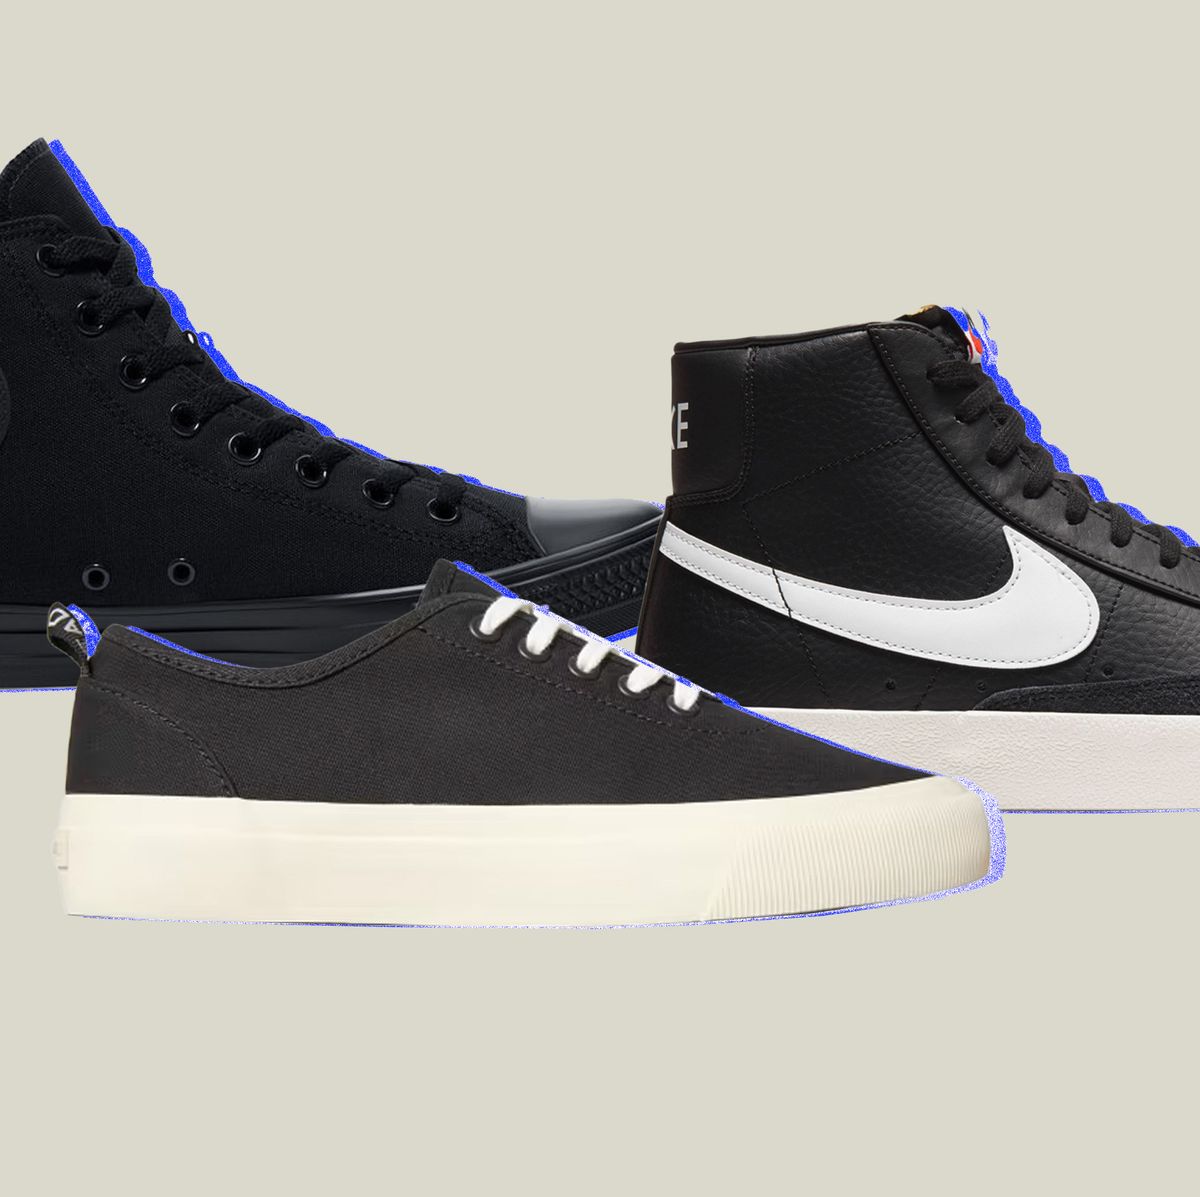 The Best Black Sneakers You Can Buy Right